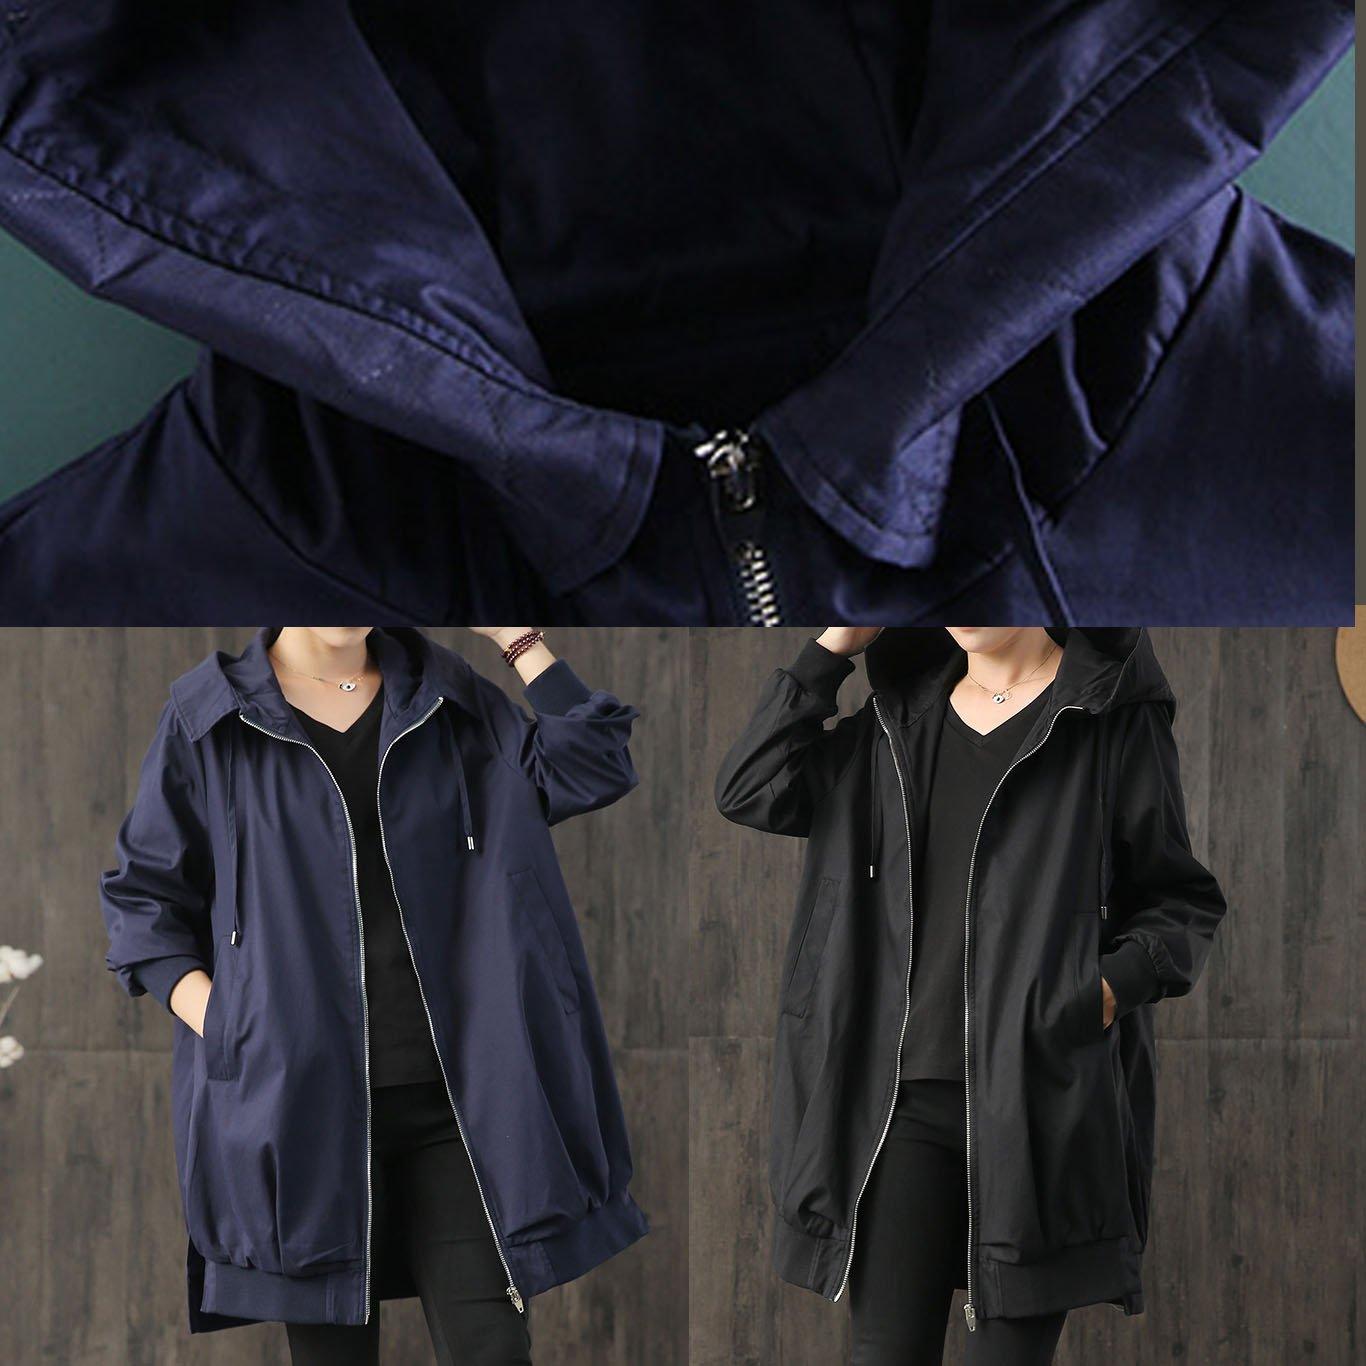 Luxury Loose fitting fall outwear navy hooded zippered drawstring Coats Women - Omychic